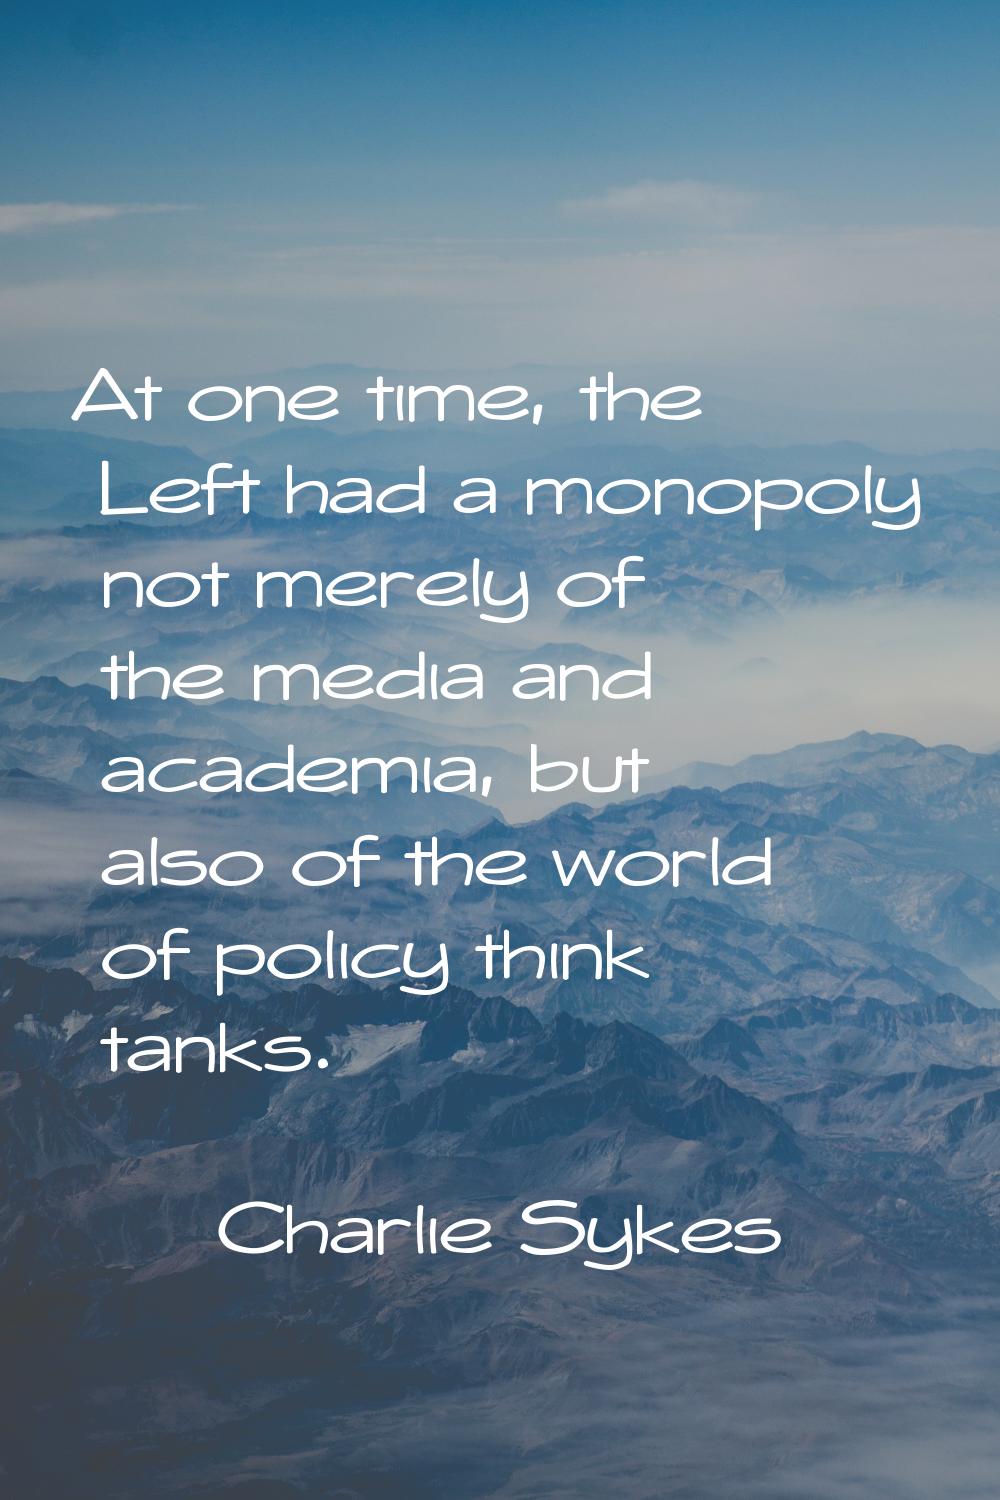 At one time, the Left had a monopoly not merely of the media and academia, but also of the world of